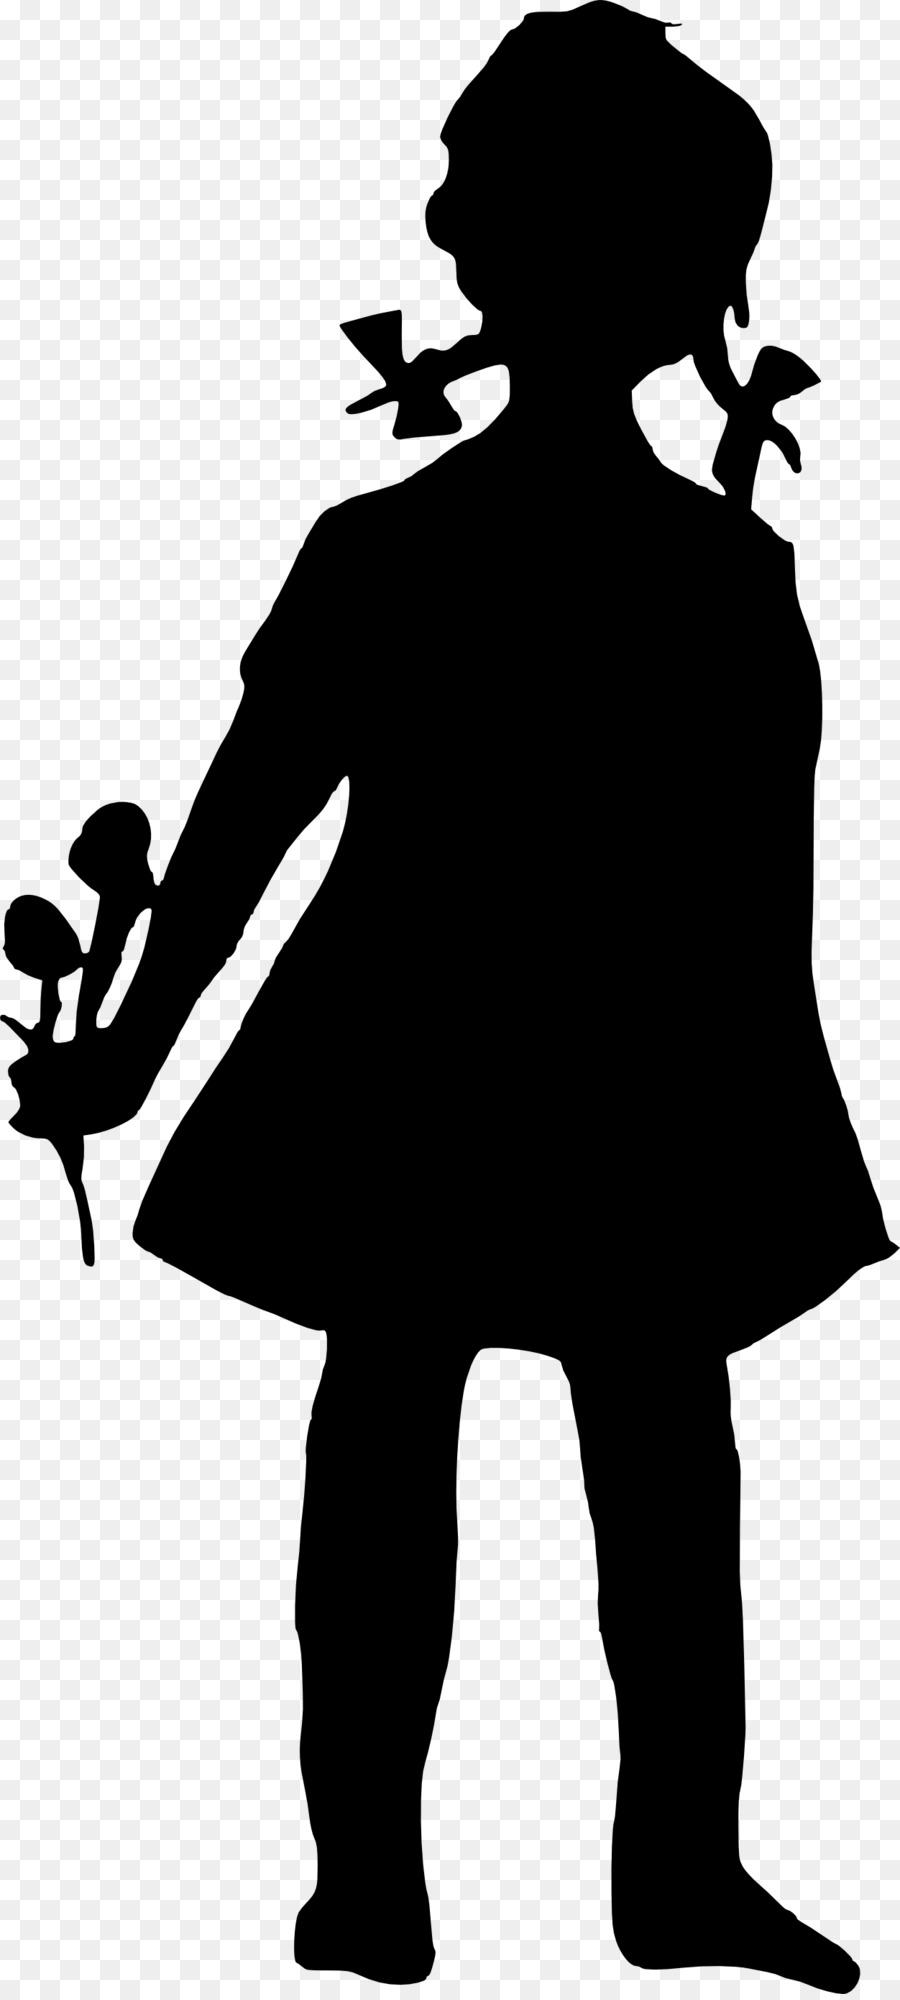 Silhouette Woman Photography Clip art - Silhouette png download - 1252*2774 - Free Transparent  png Download.